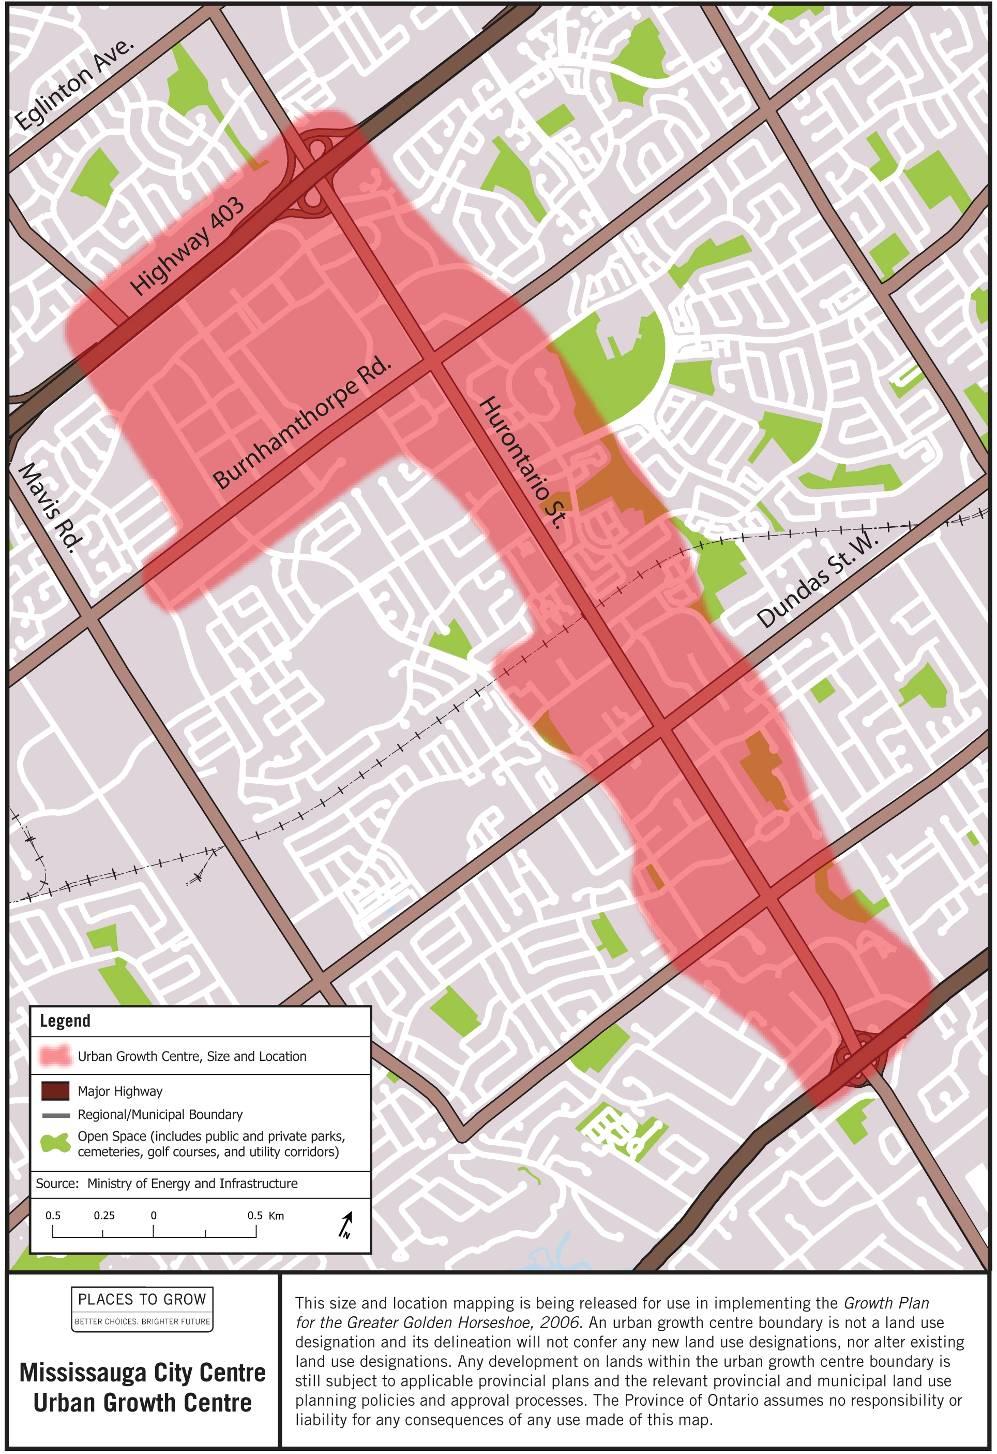 FIGURE 1 MISSISSAUGA CITY CENTRE URBAN GROWTH CENTRE 4 4 SOURCE: Size and Location of Urban